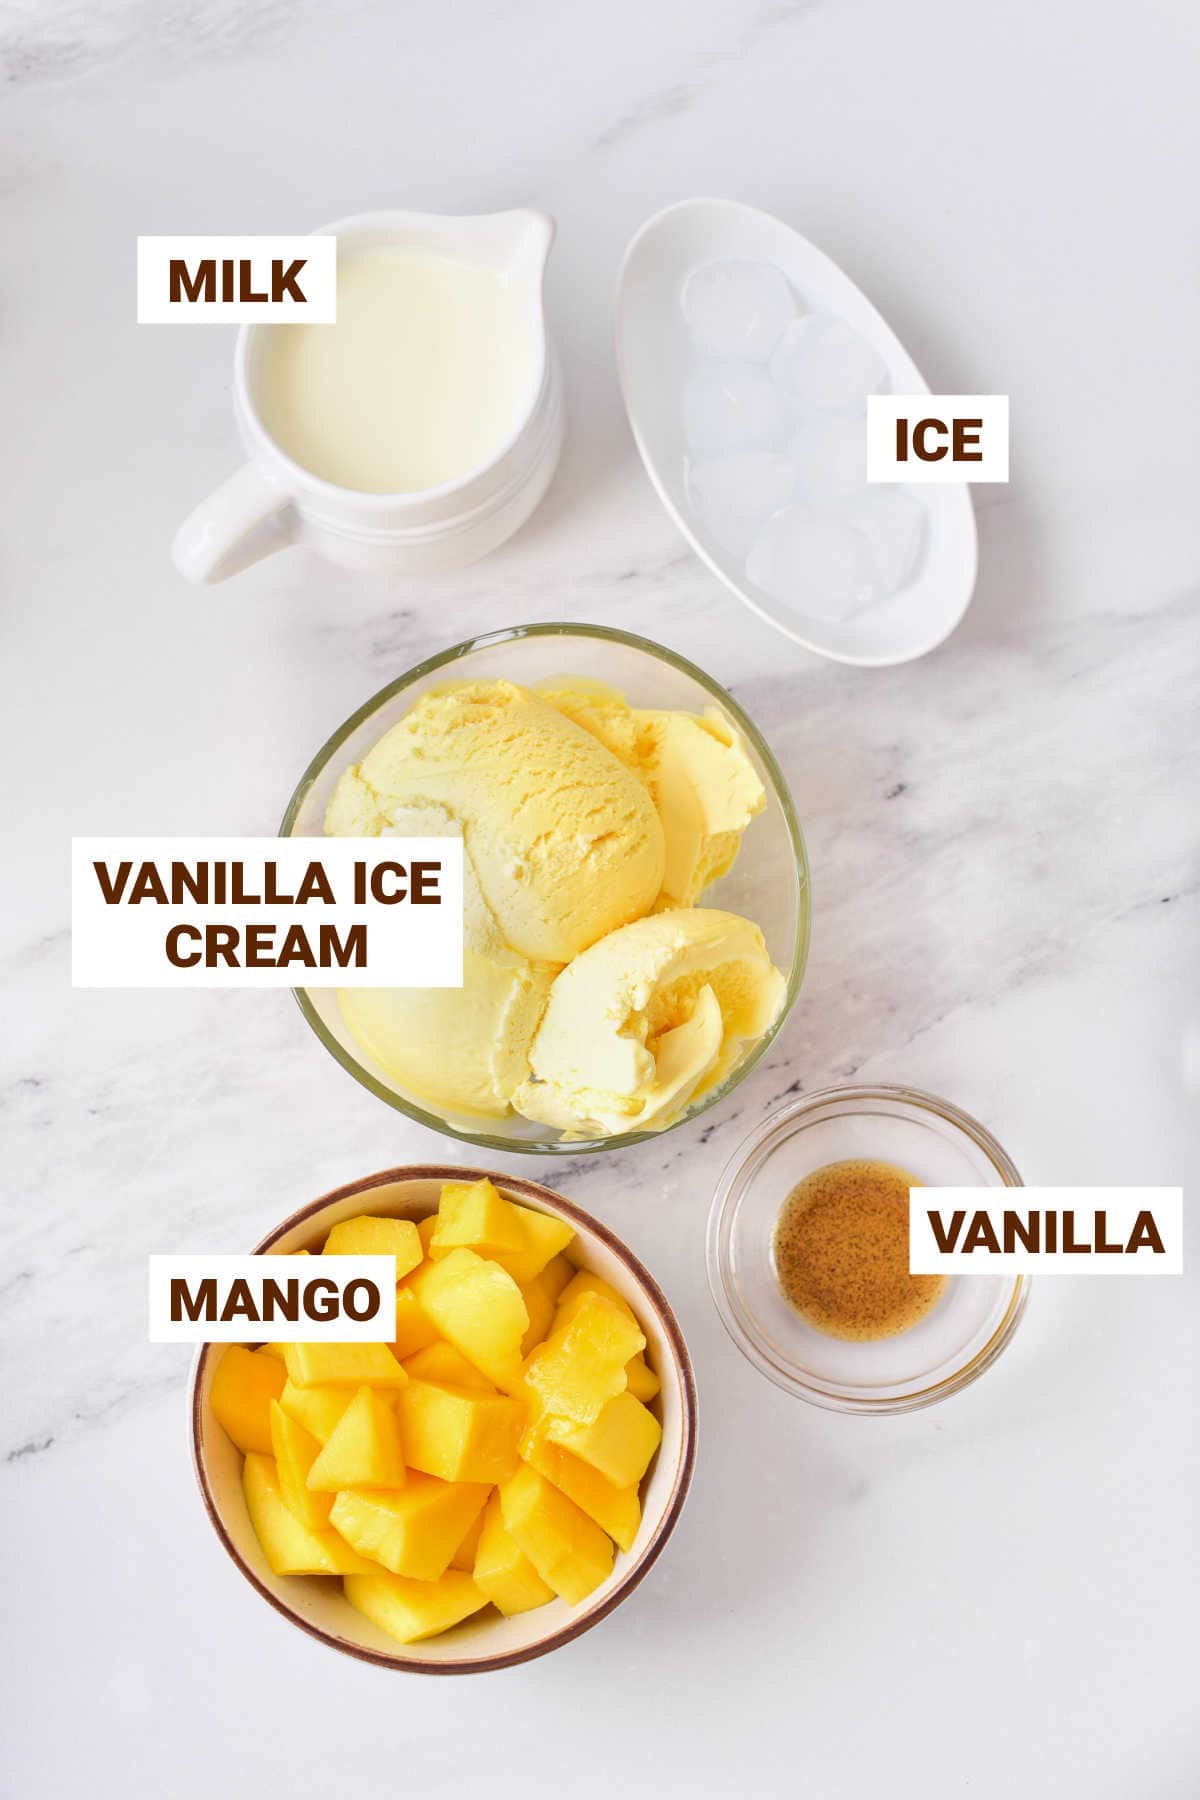 White marbled surface with bowl containing ingredients for mango milkshake including ice cream, milk, ice, vanilla.